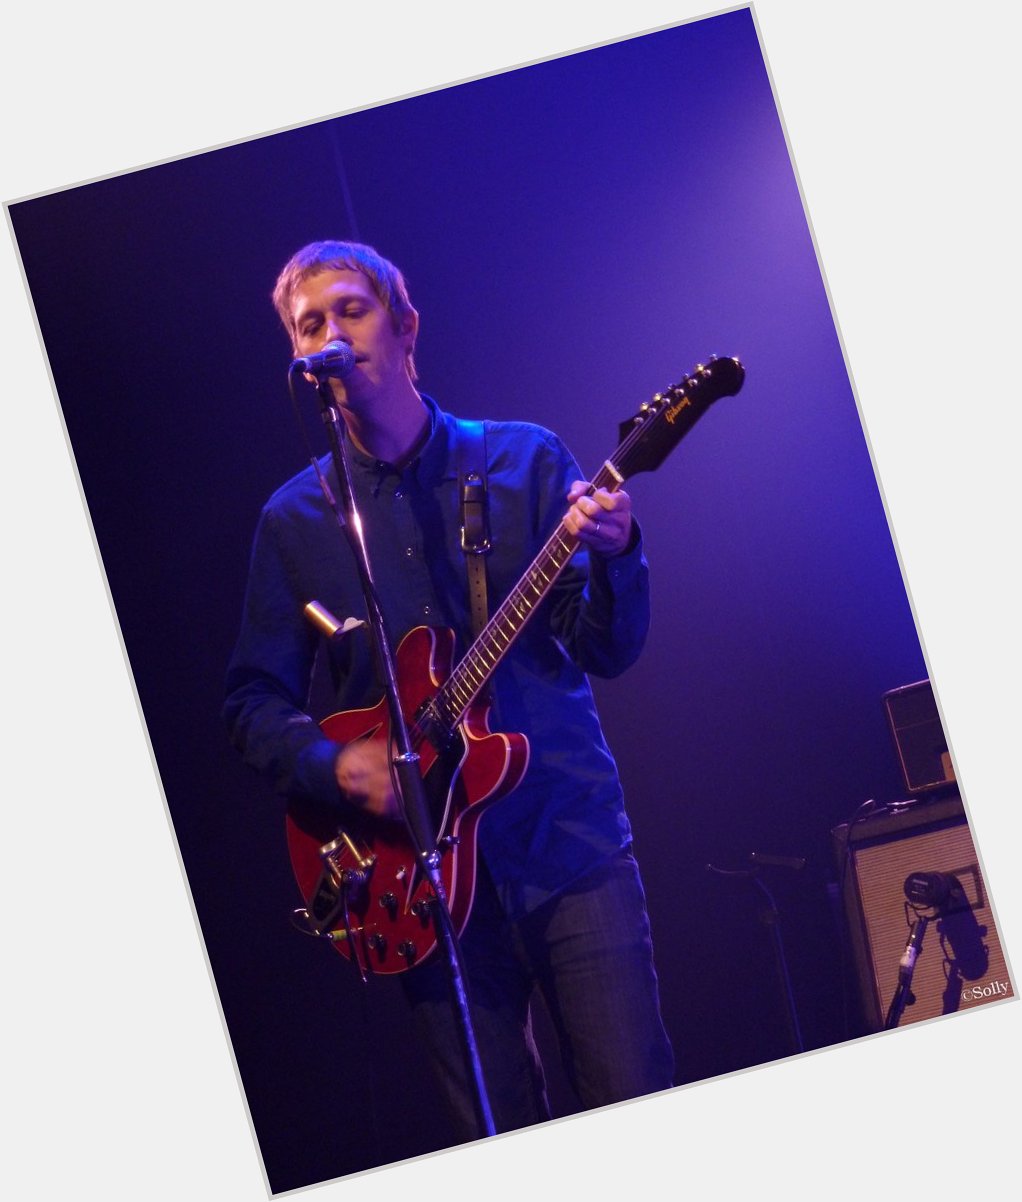 Born 11 August in Cardiff, happy birthday to Andy Bell of RIDE (and a few other notable bands)! 